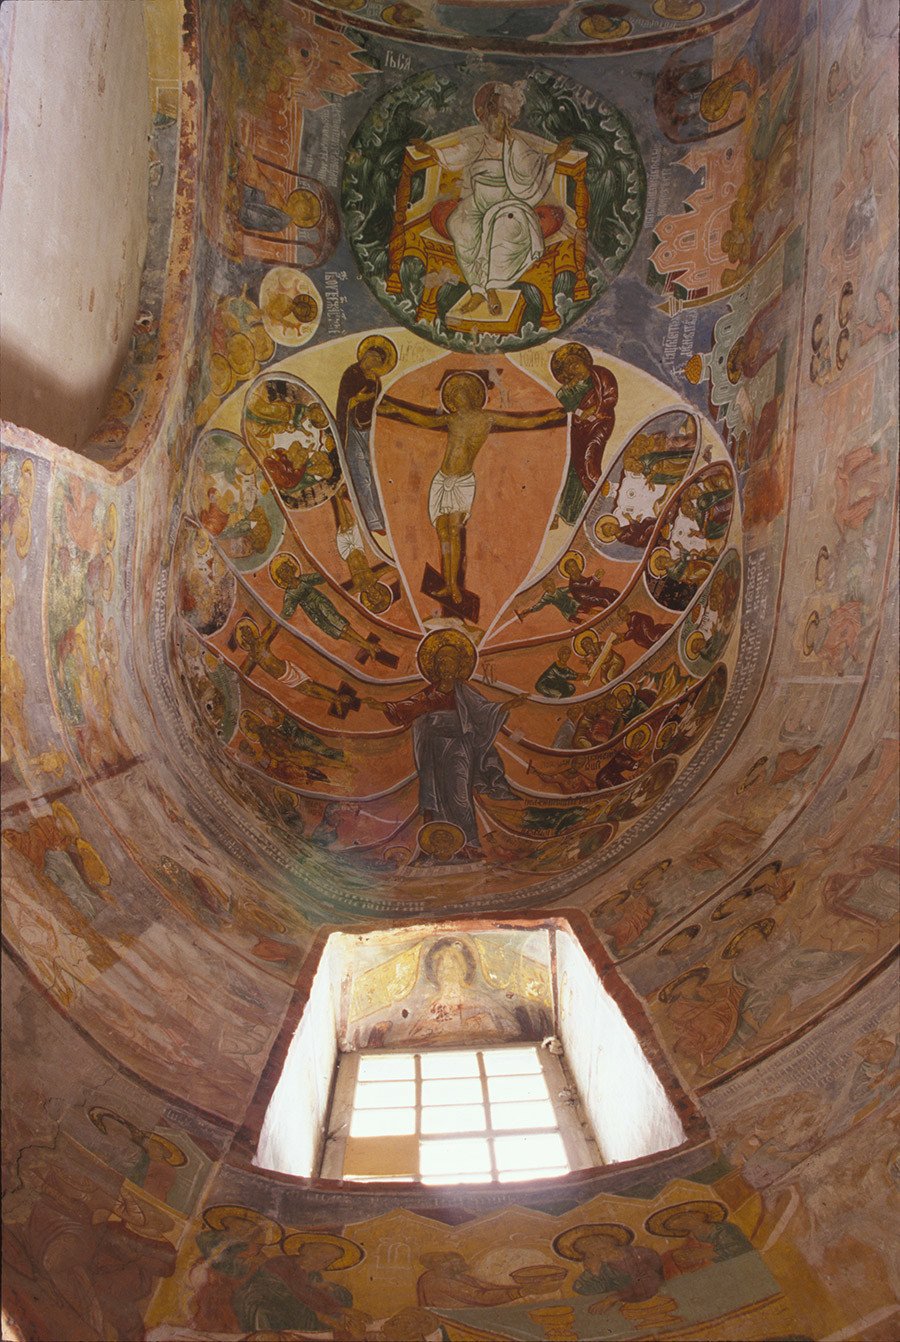 Cathedral of the Annunciation. Diaconicon (right part of apse). Ceiling fresco of Passions (martyrdom) of the Apostles, with Christ in the center and Christ crucified beneath image of Lord God Sabaoth. June 20, 2000